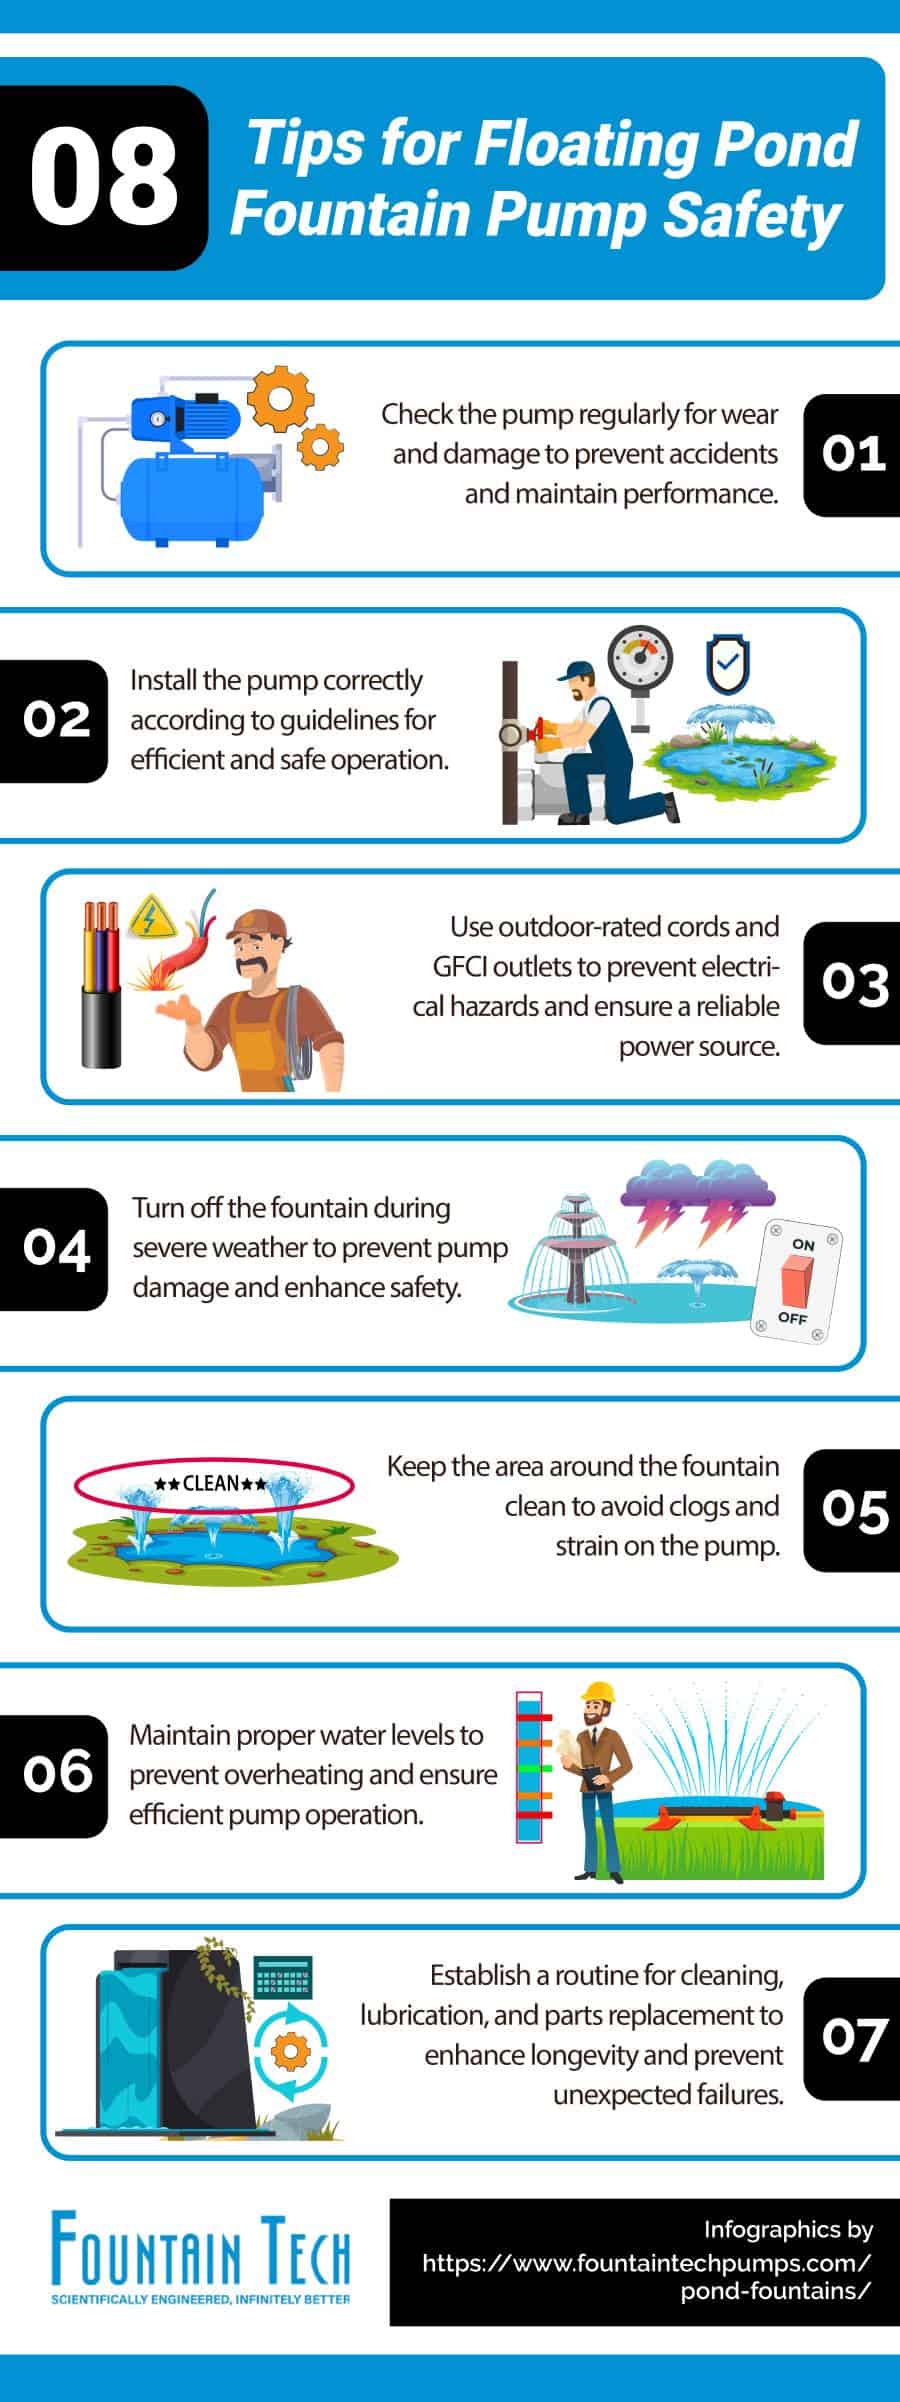 Floating Pond Fountain Pump Safety